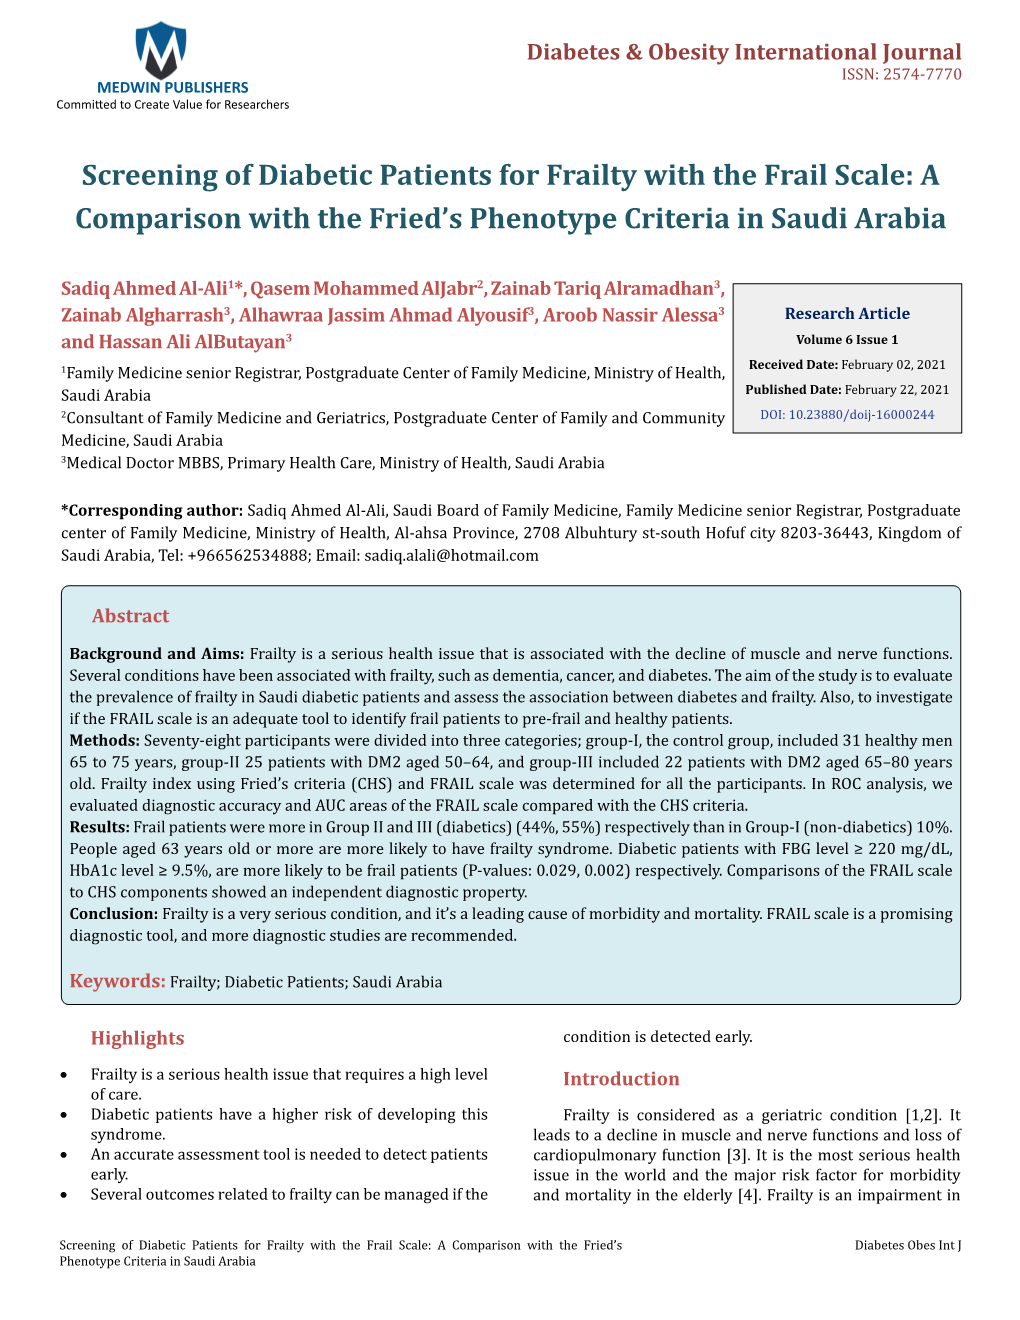 Sadiq Ahmed Al-Ali, Et Al. Screening of Diabetic Patients for Frailty with the Frail Scale: a Comparison with the Fried's Phen